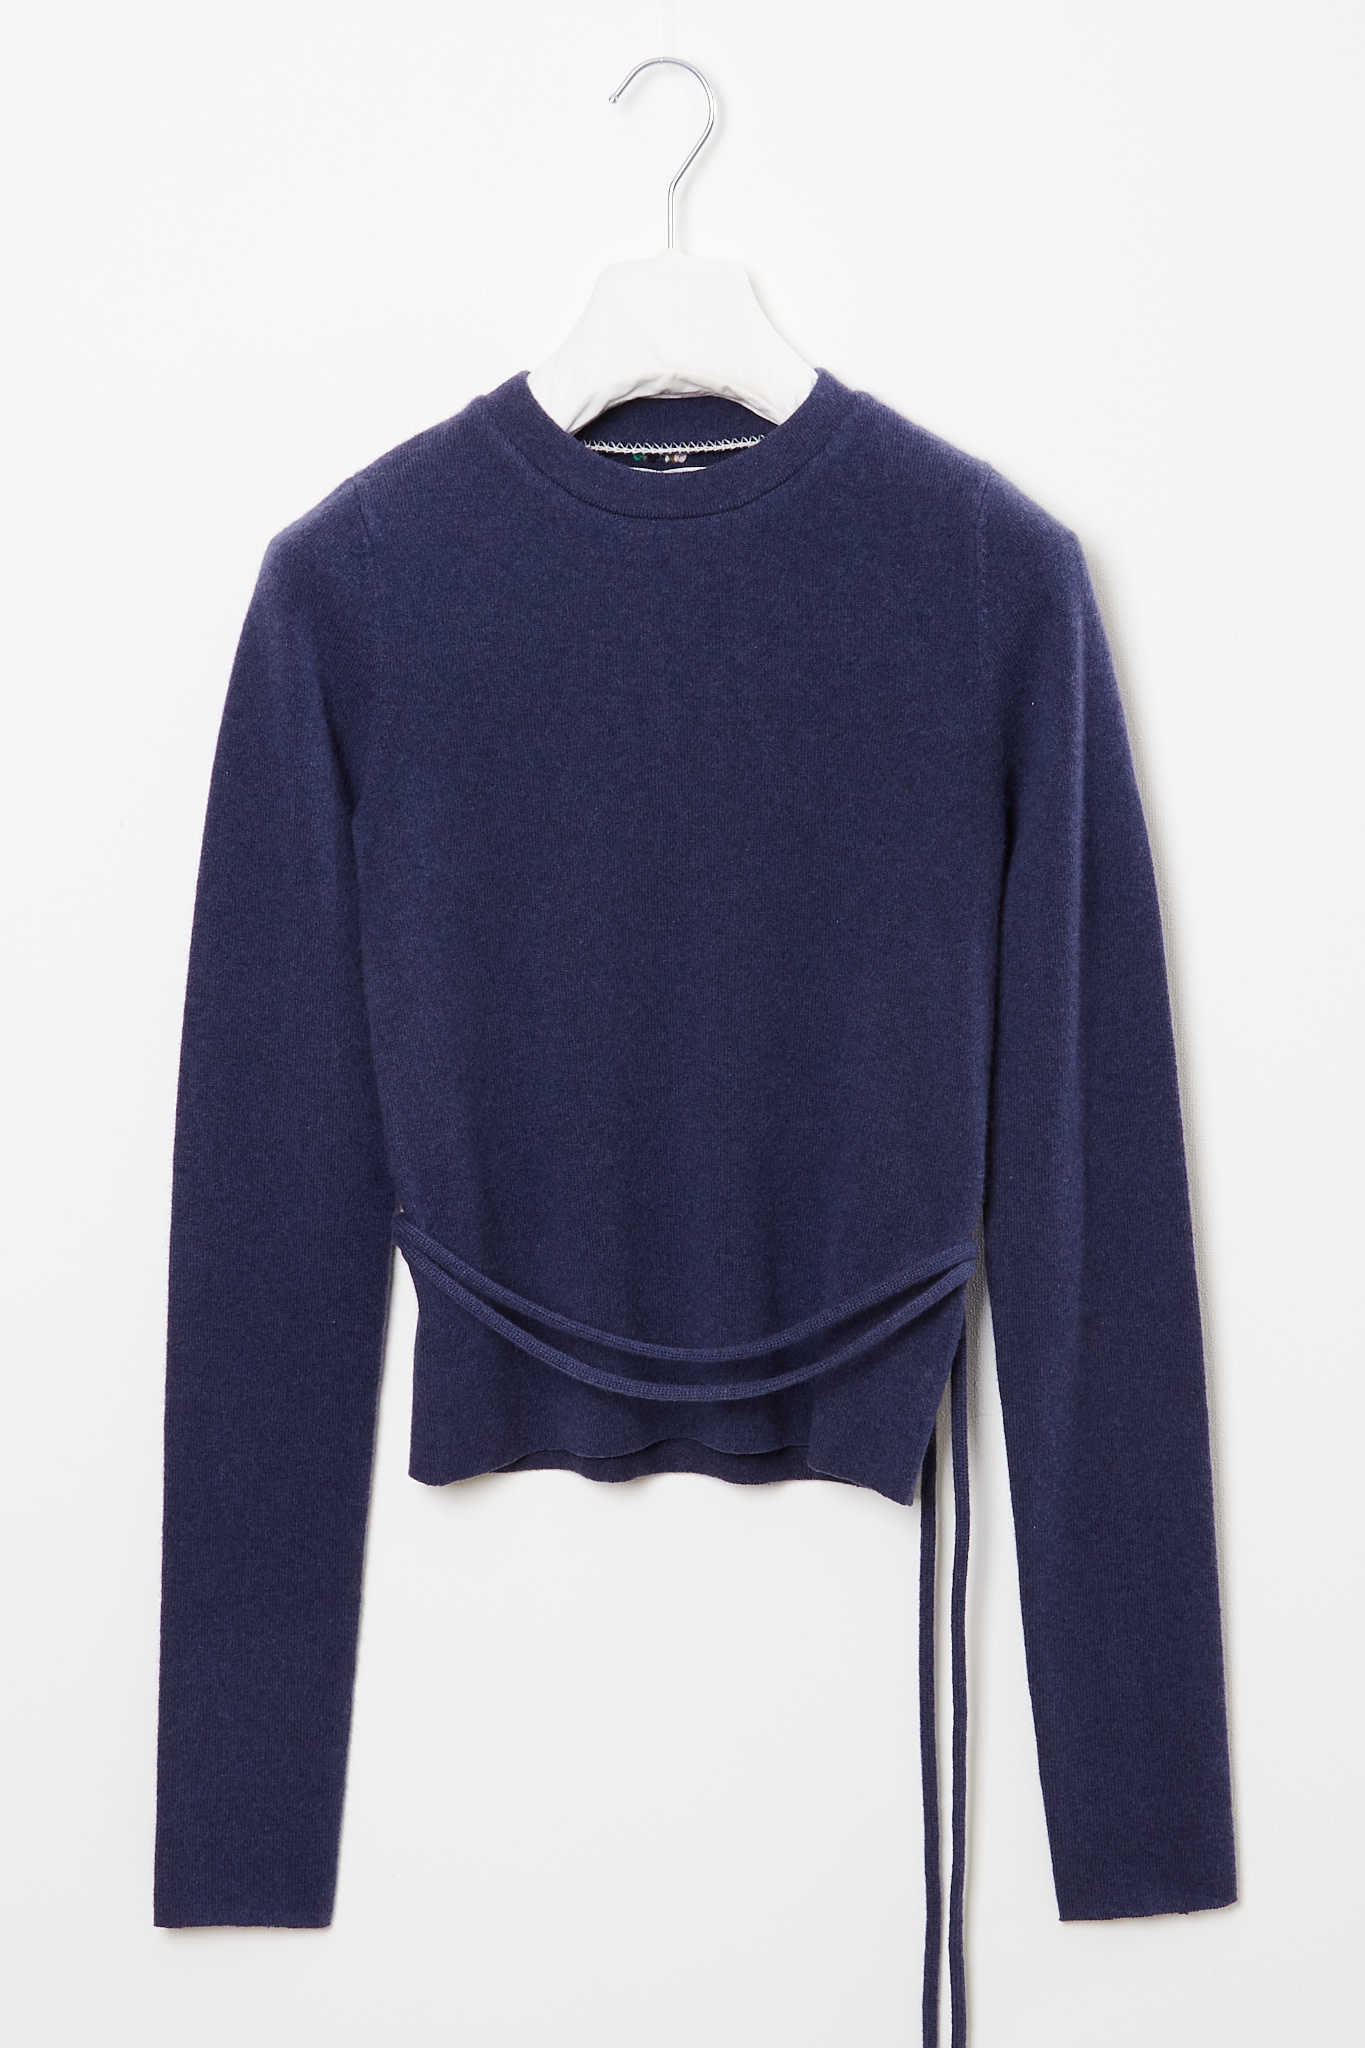 extreme cashmere - Minus cashmere sweaters